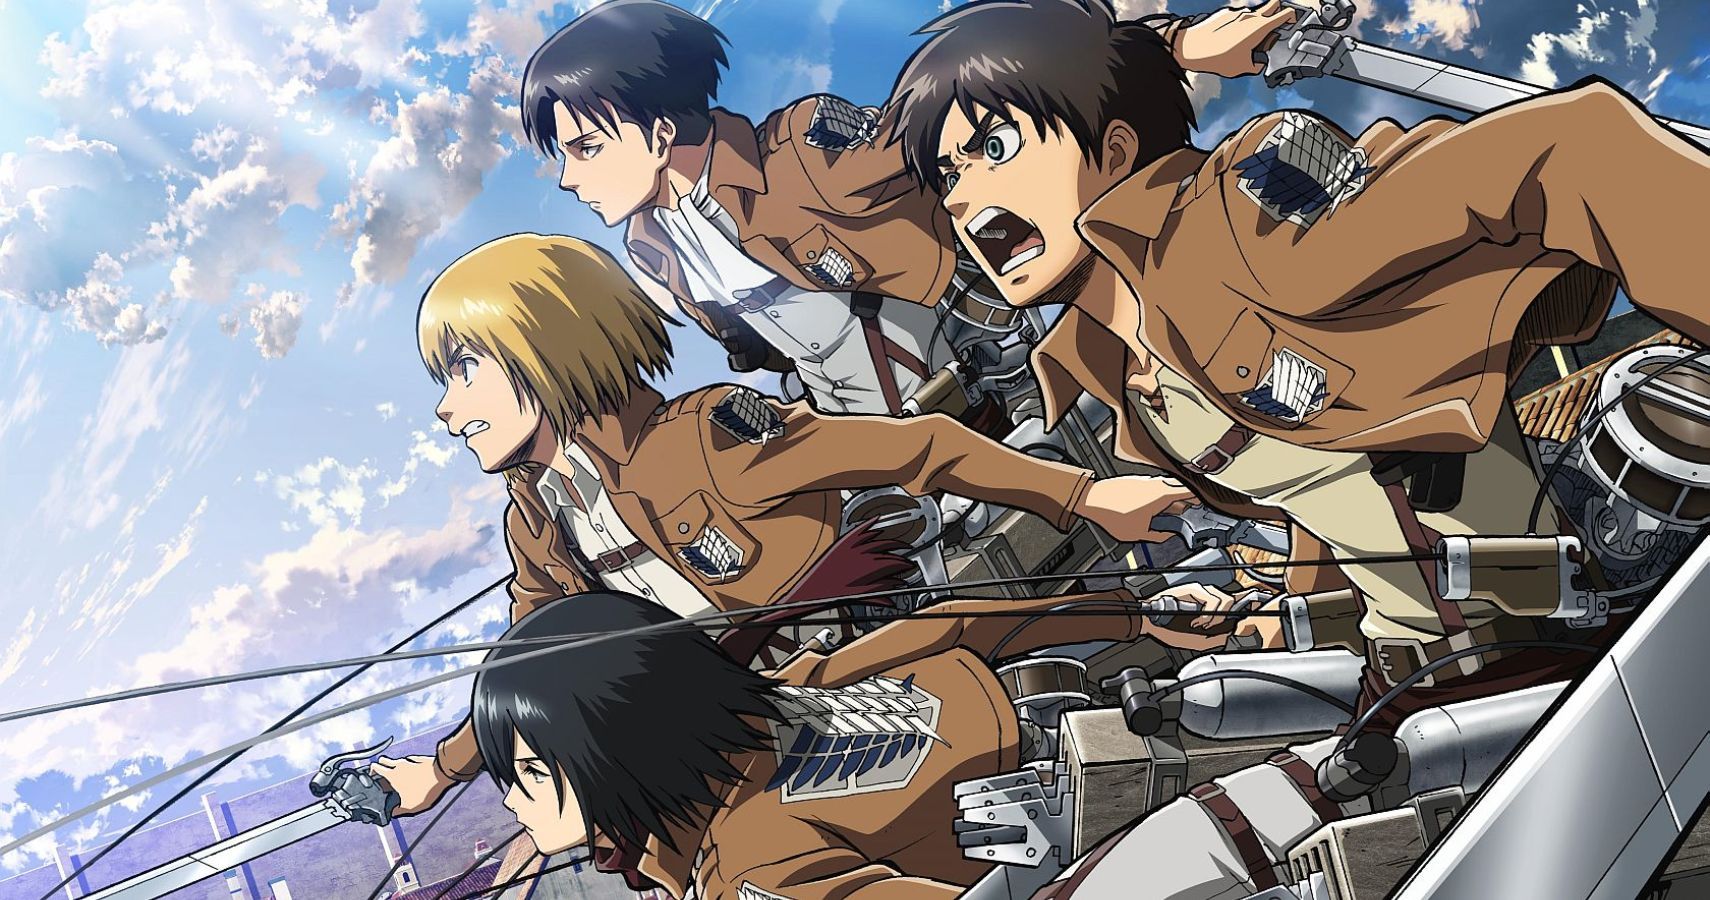 Attack On Titan: 5 Things We Want The Anime To Copy From The Manga